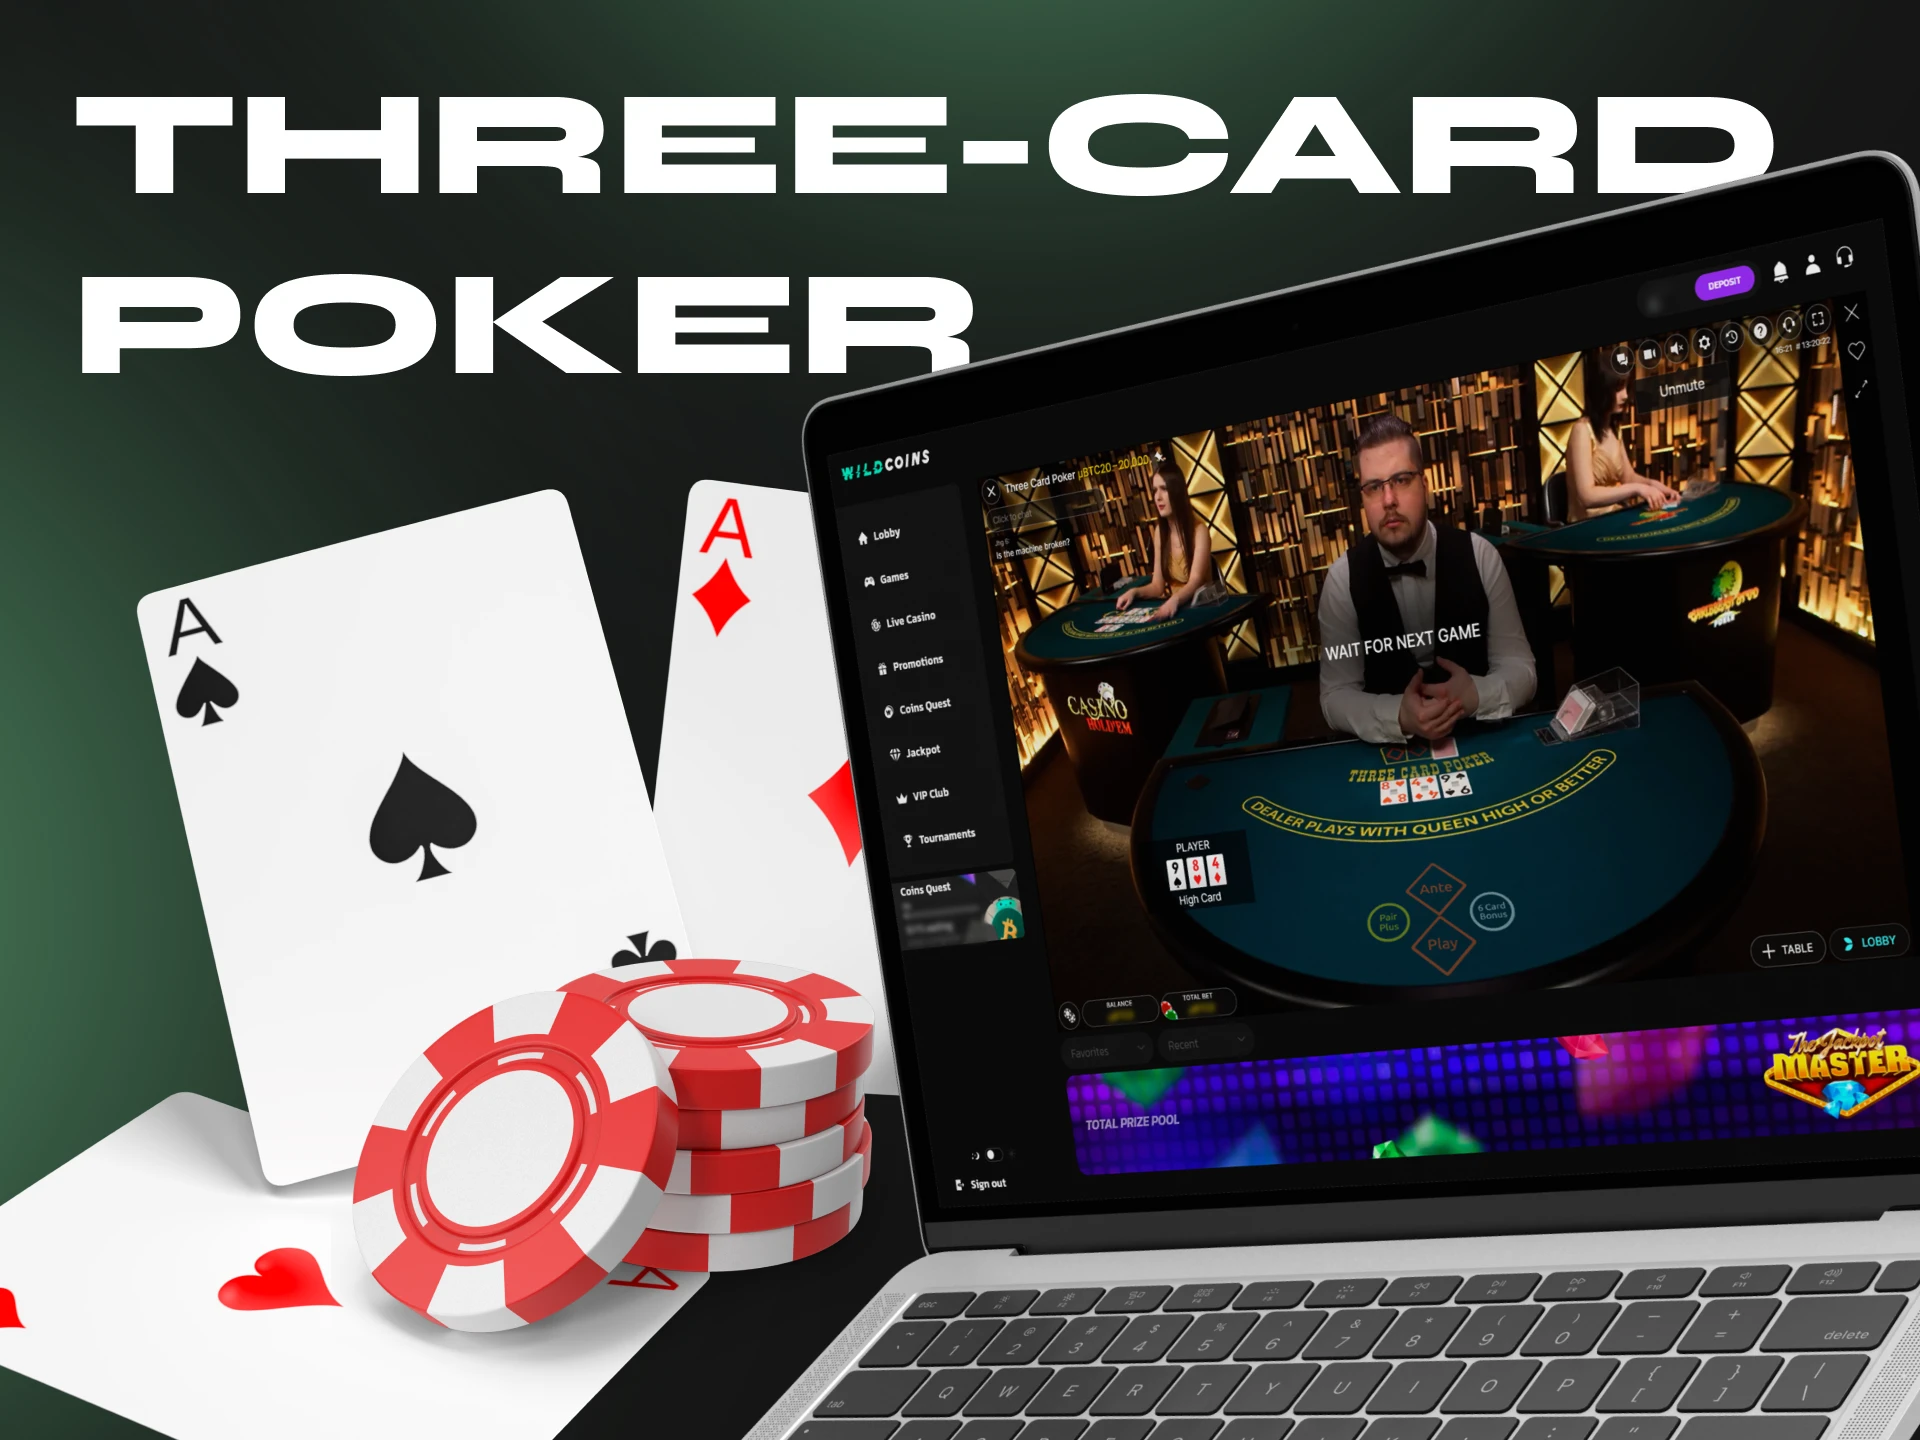 Crypto casinos offer three card poker that you can play.